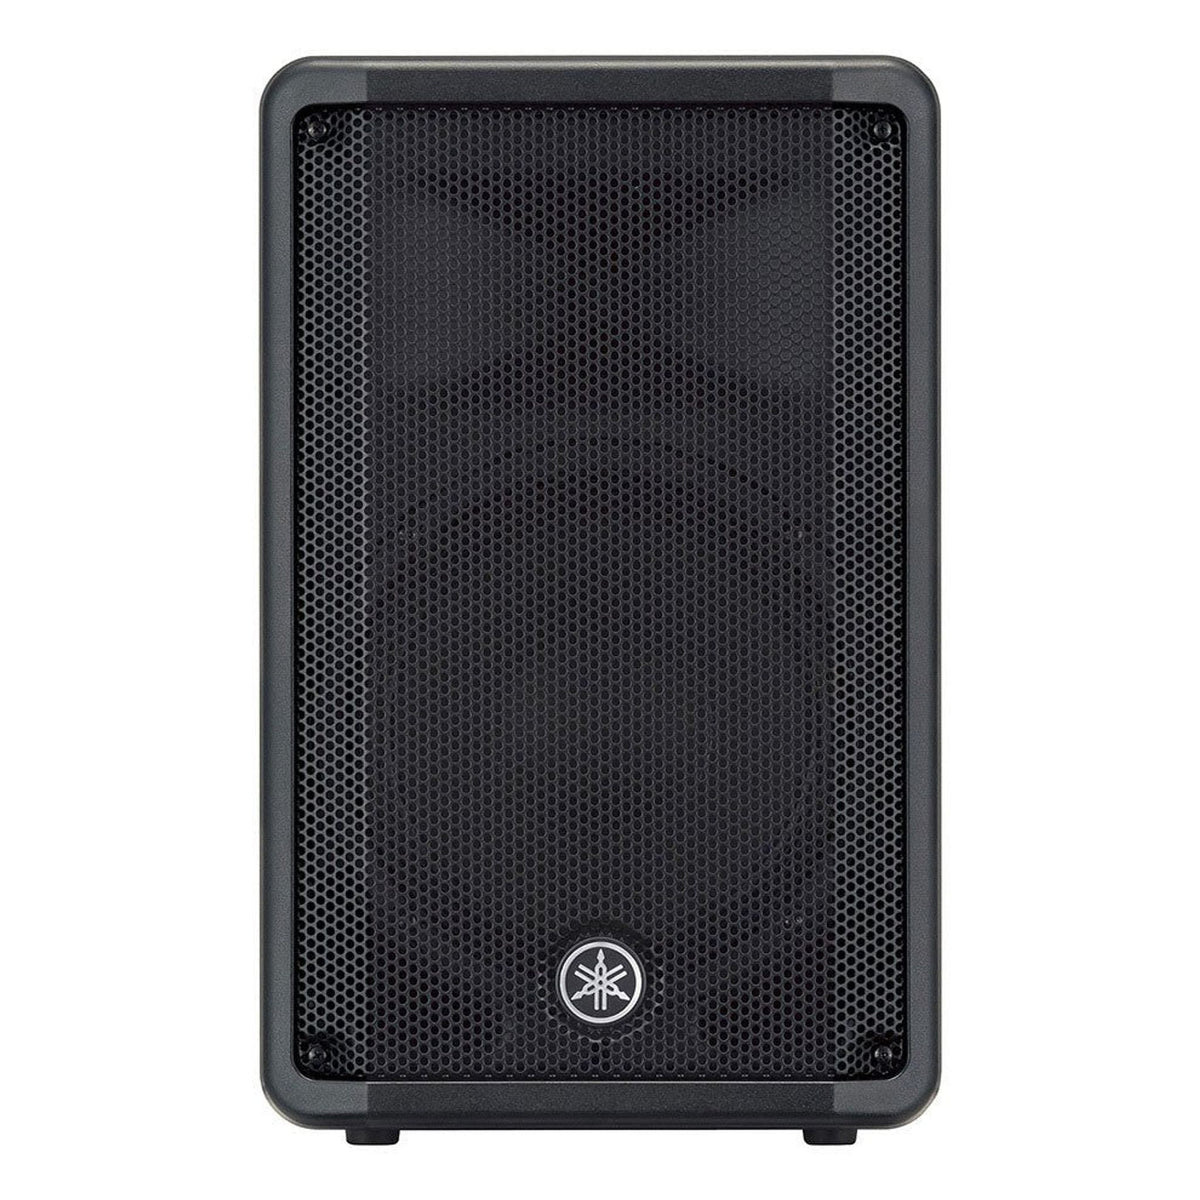 The Yamaha DBR10 Powered Speakers deliver powerful, high-quality sound with an unmatched economy of transport and setup time.